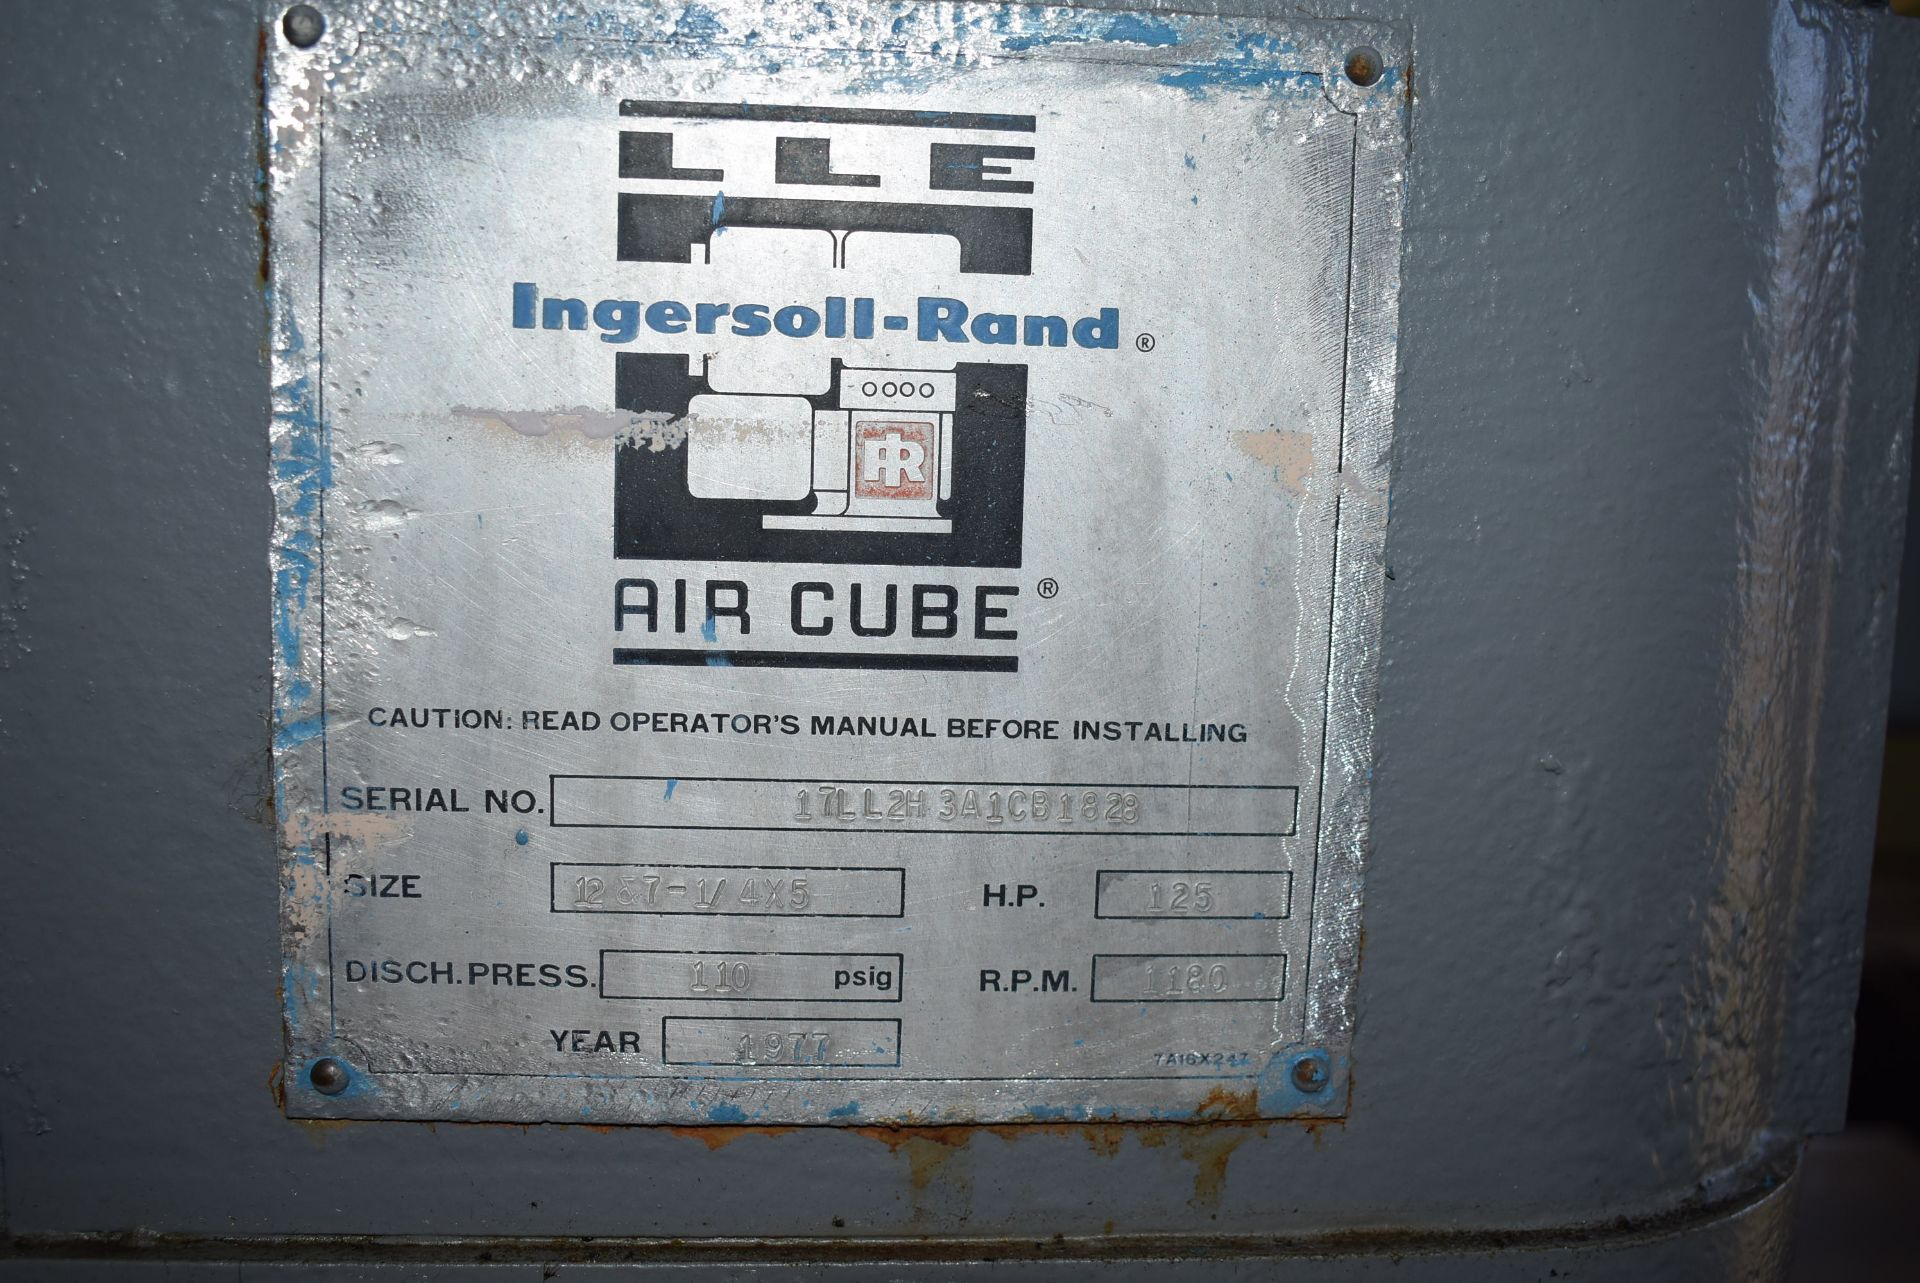 (Located in Mendota, IL) Ingersoll Rand Model #LLE-2HS/125 HP Water Cooled Air Compressor, Rated 570 - Image 2 of 3